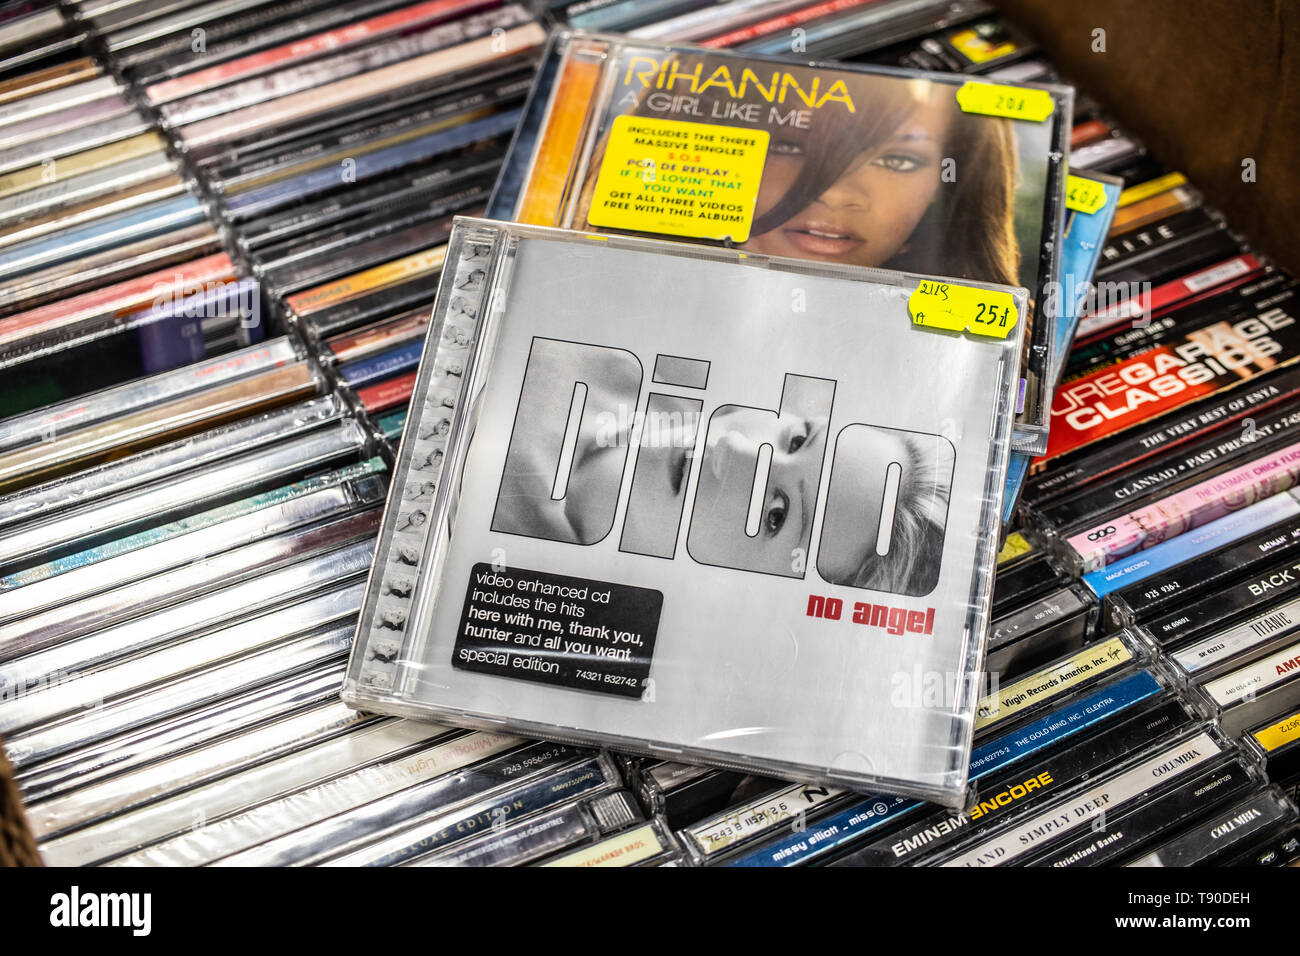 Nadarzyn, Poland, May 11, 2019: Dido CD album No Angel 1999 on display for sale, famous English singer and songwriter, collection of CD music albums Stock Photo